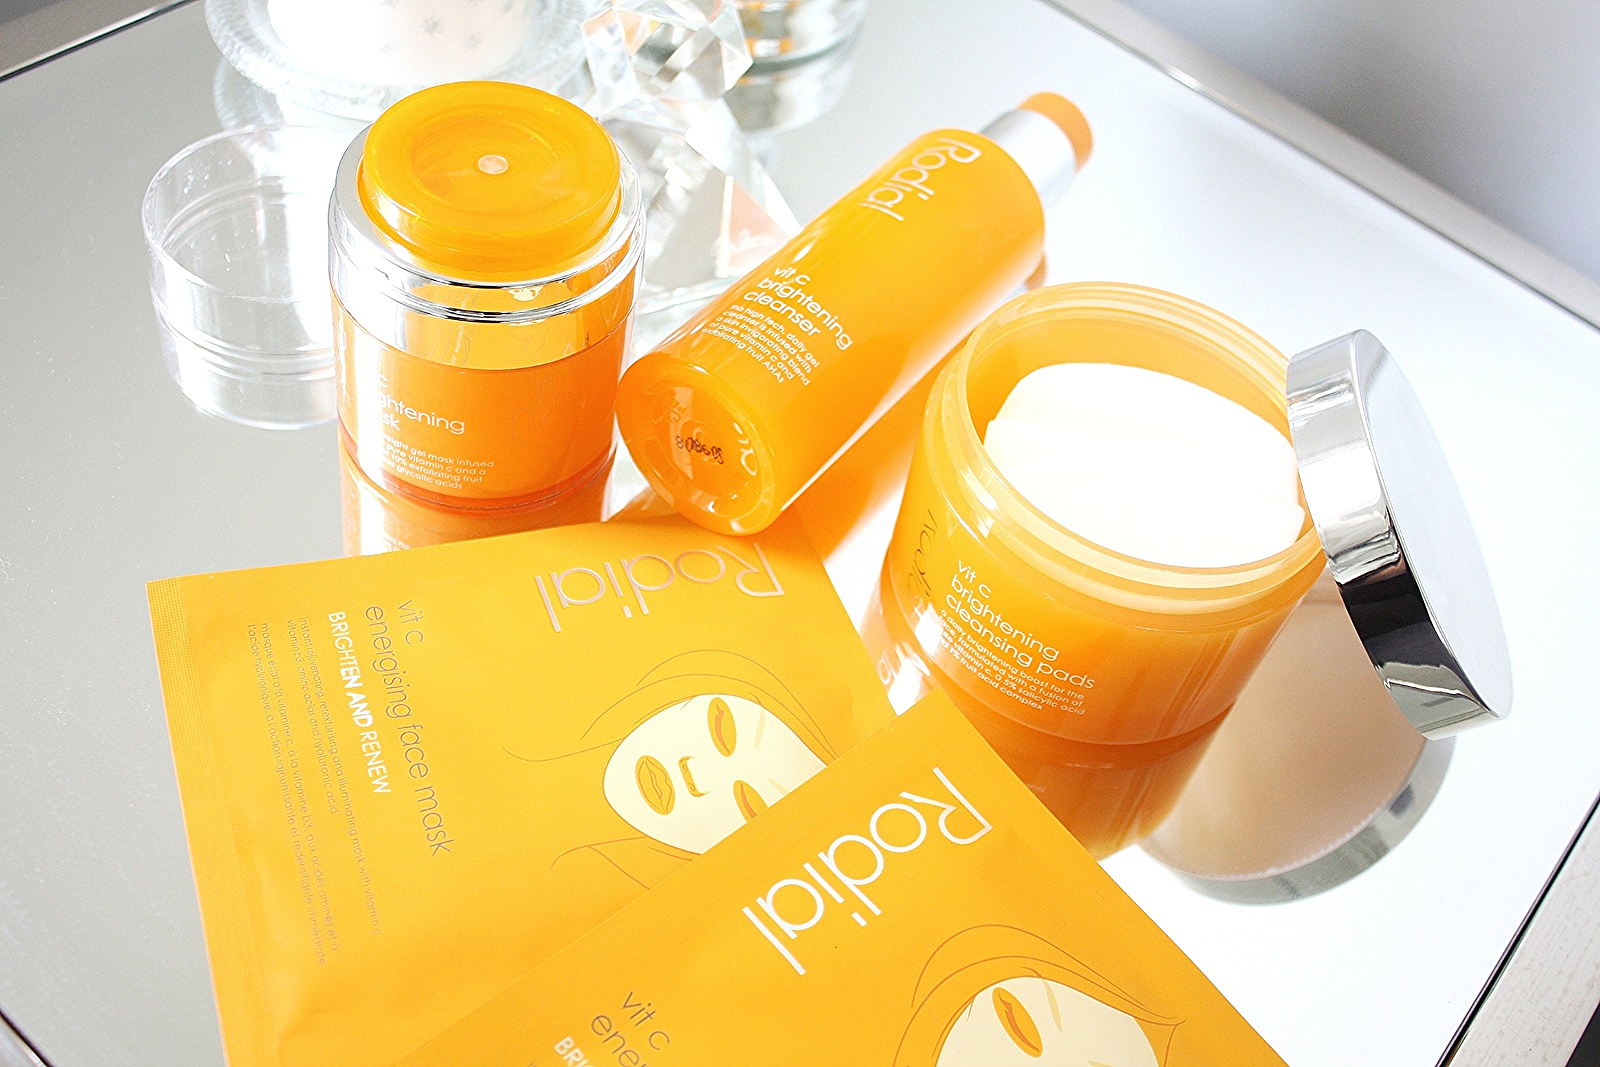 RODIAL VITAMIN C COLLECTION